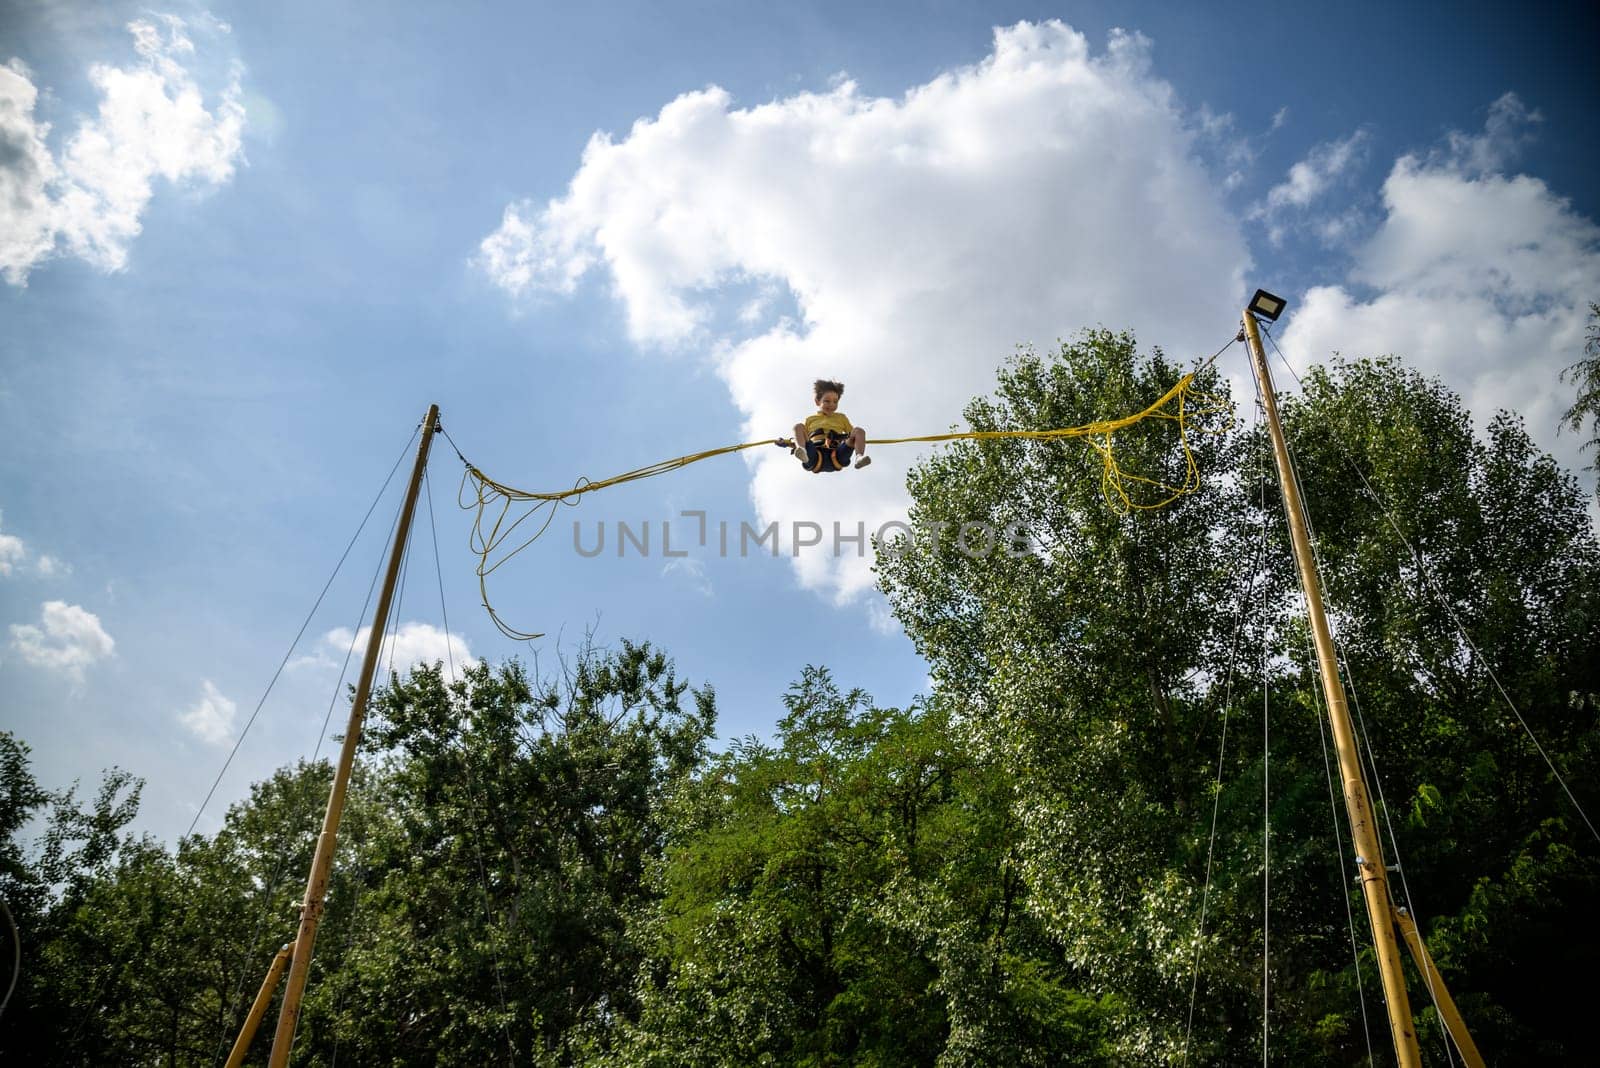 The boy is jumping on a bungee trampoline. A child with insurance and stretchable rubber bands hangs against the sky. The concept of happy childhood and games in the amusement park.